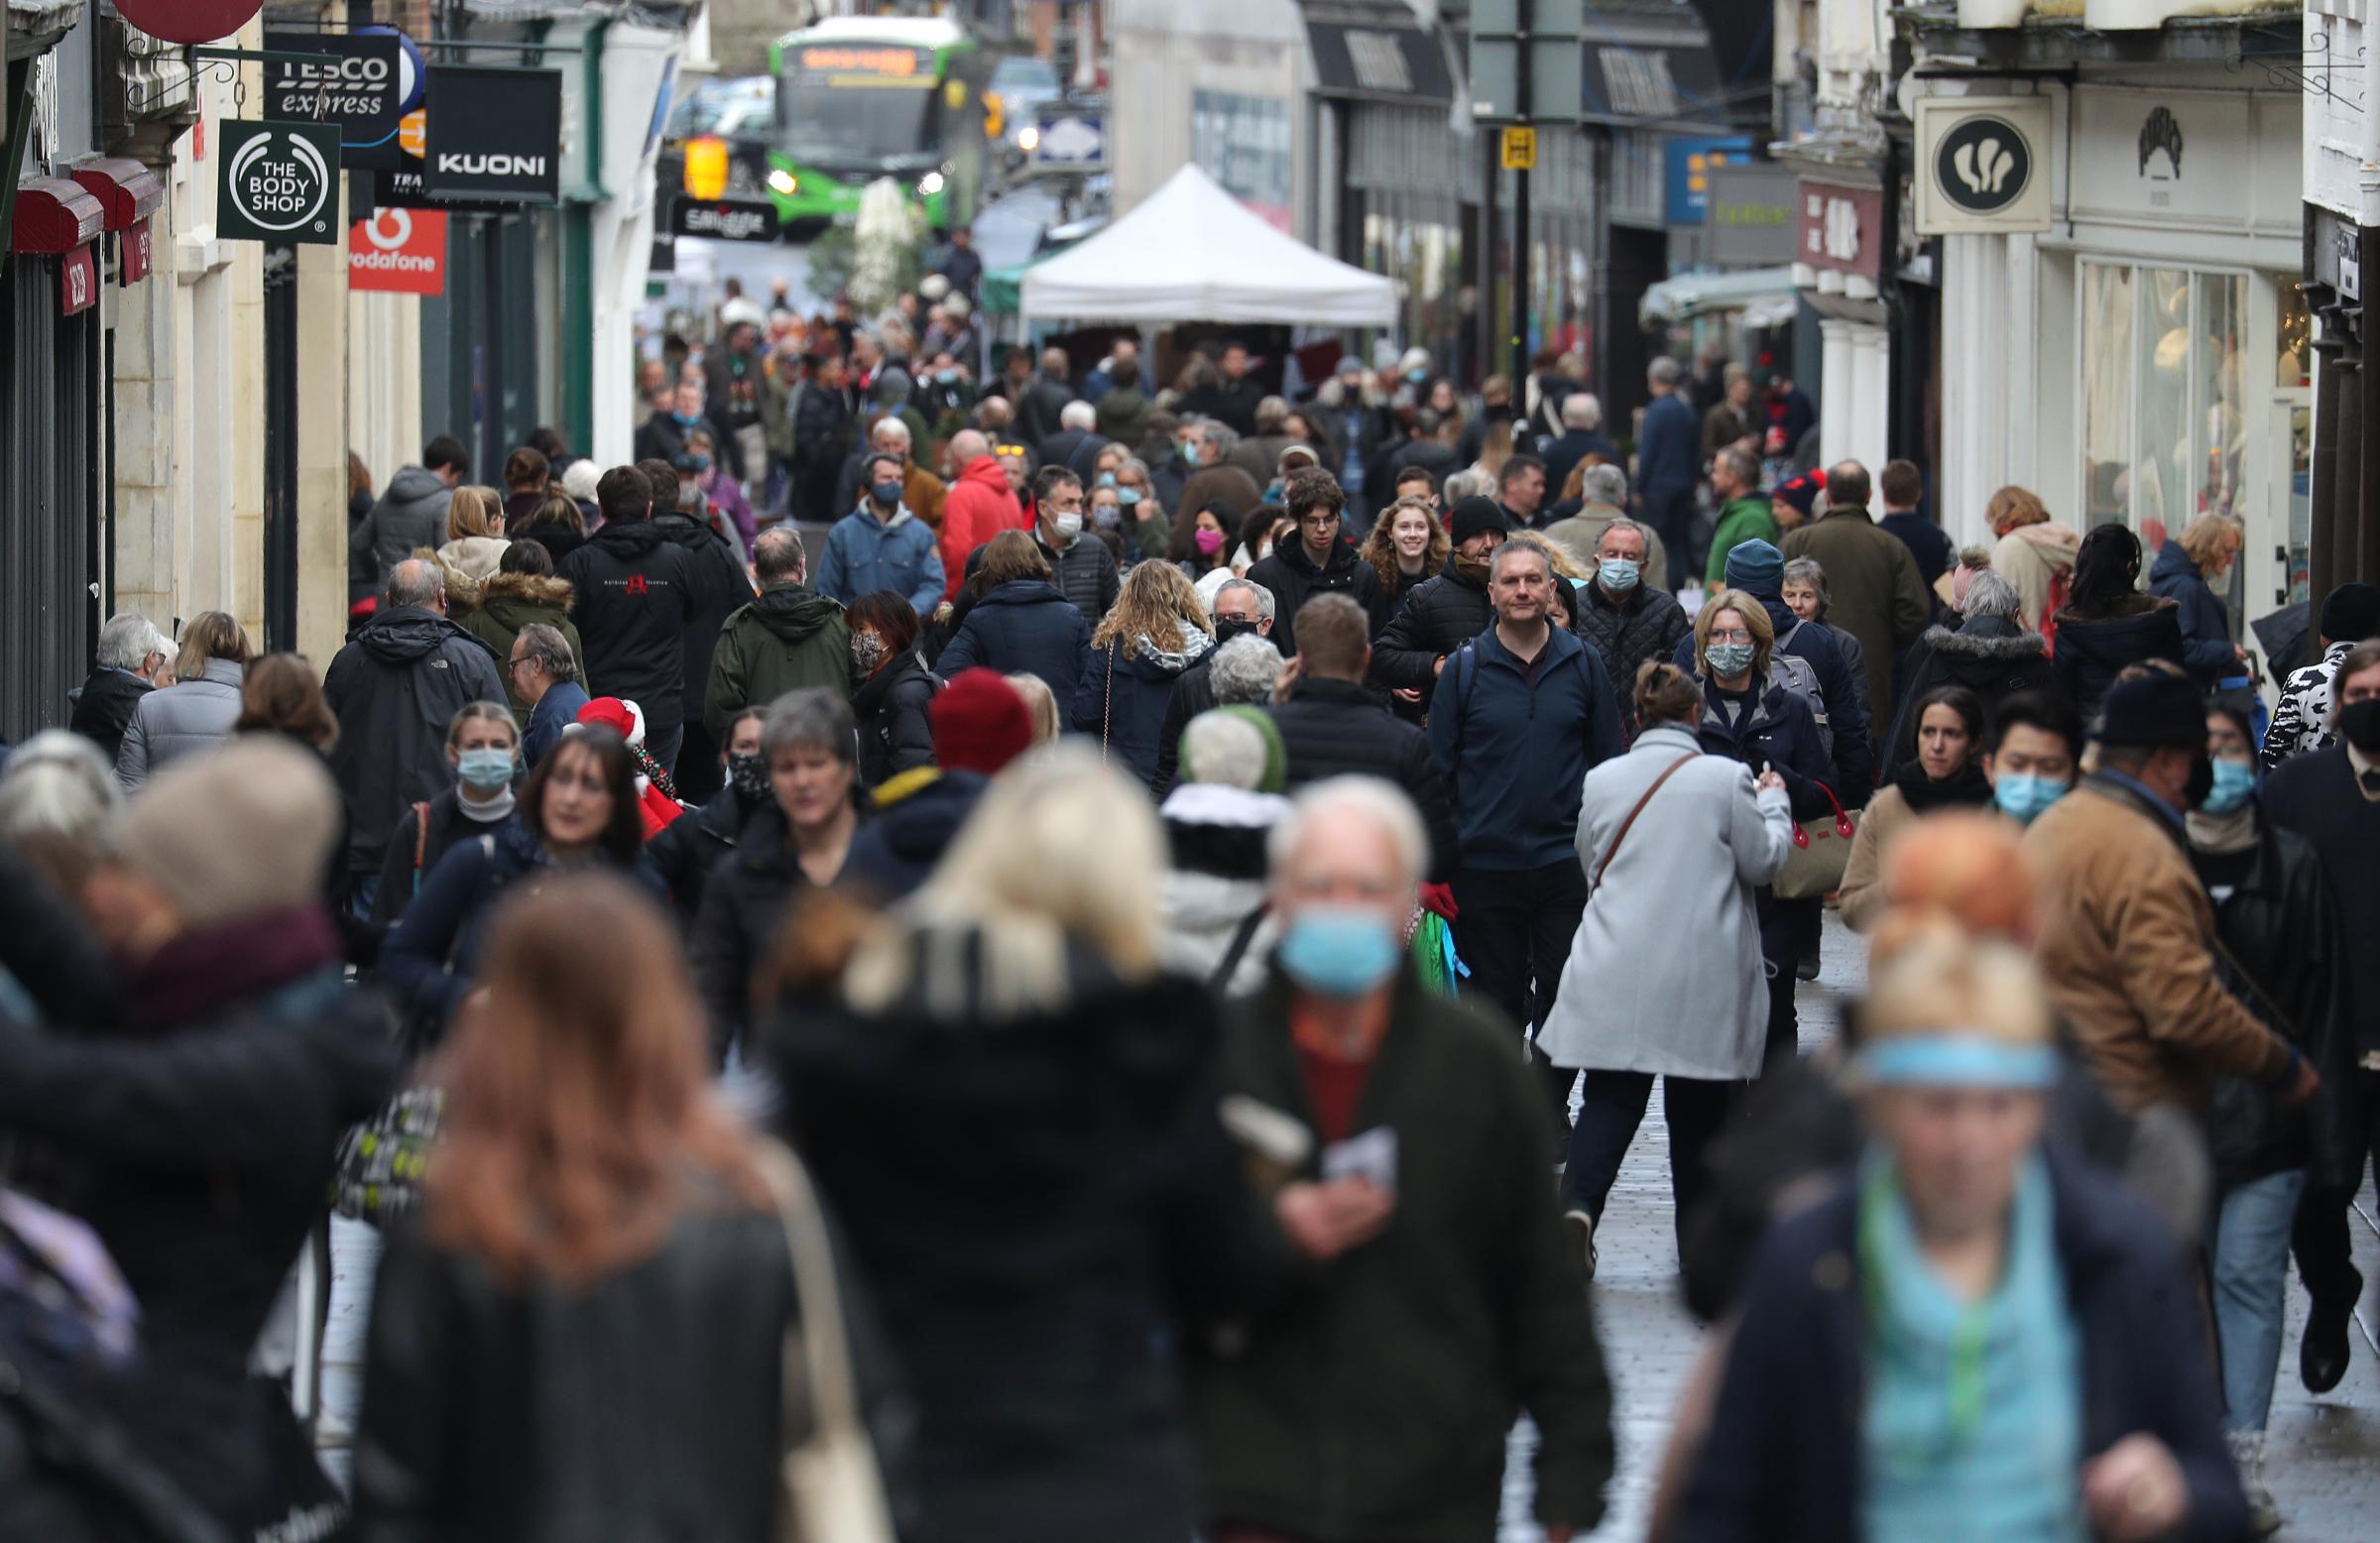 Christmas shoppers make their way along the High street in Winchester, Hampshire, which is in tier 2 of coronavirus restrictions. Downing Street has said that restrictions measures over the Christmas period were being kept under constant review in res